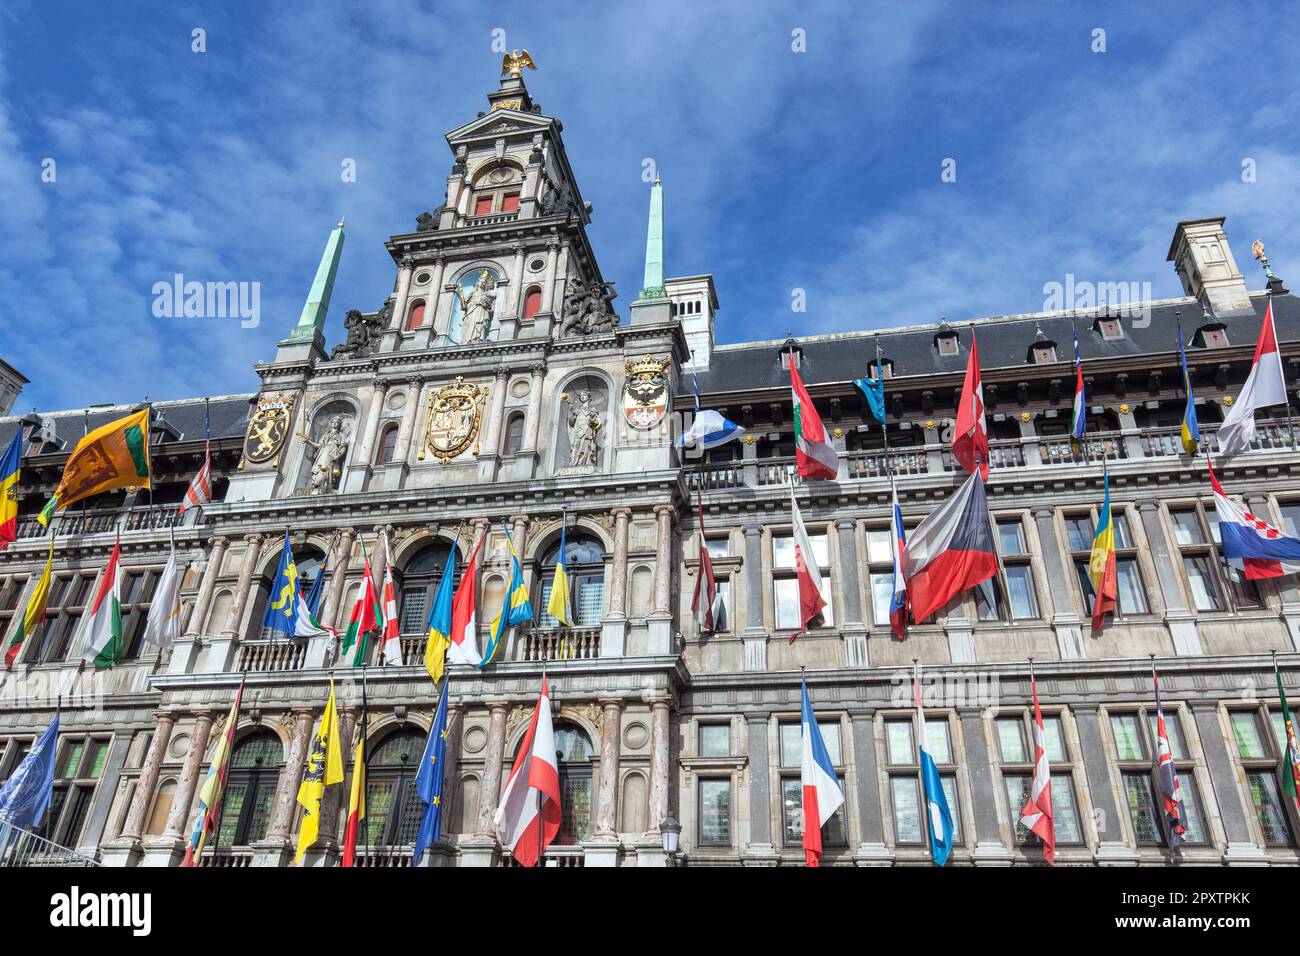 Historic renaissance style town hall, stadhuis, from 16th century with flags in Grote Markt, Old Town, Antwerp UNESCO world heritage site. Stock Photo